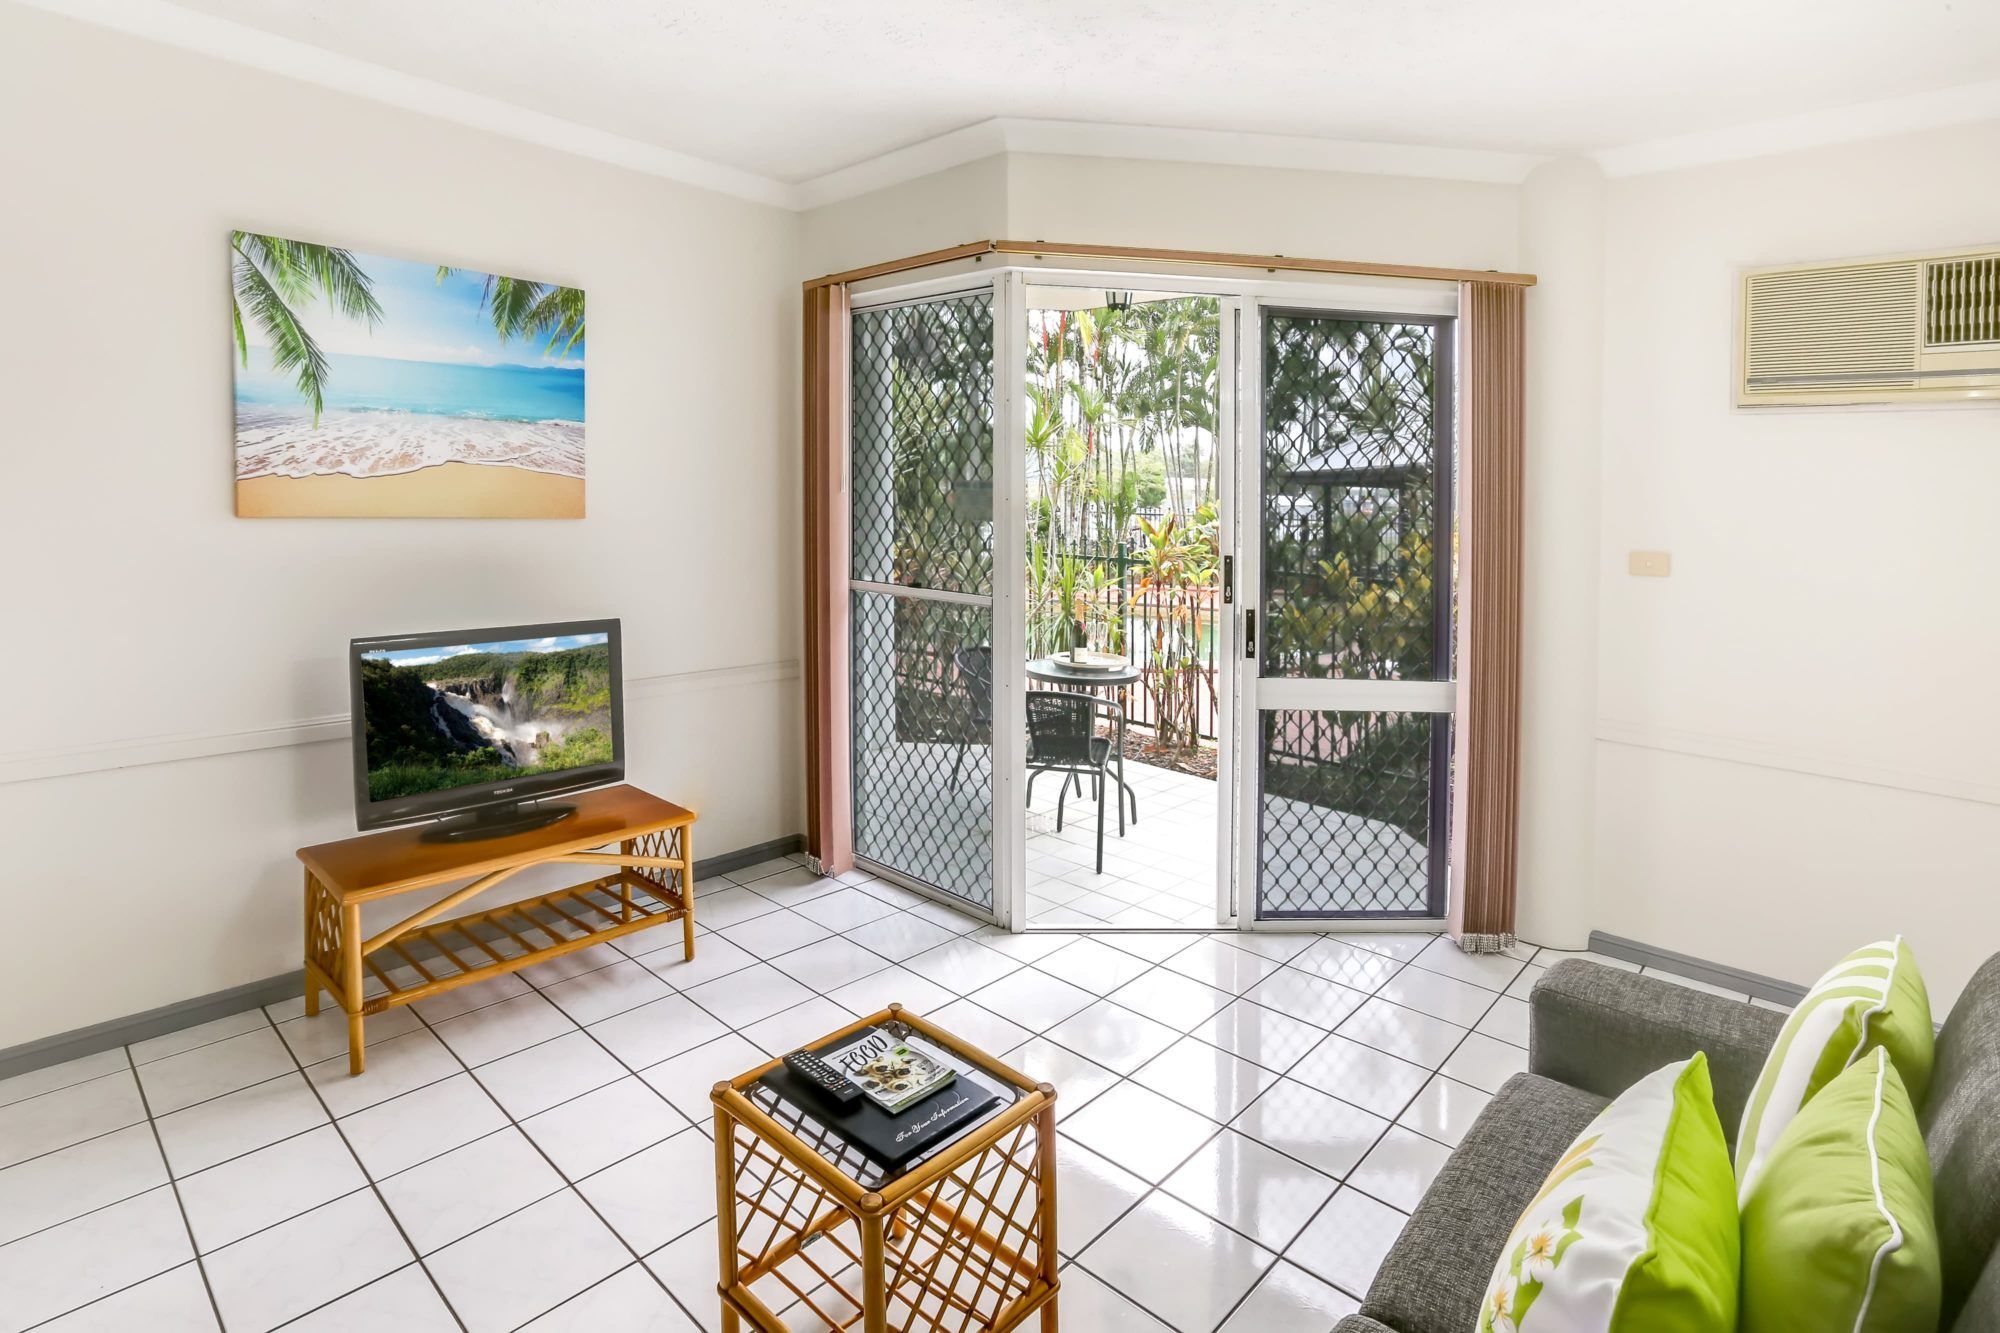 City Sider Cairns Holiday Apartments